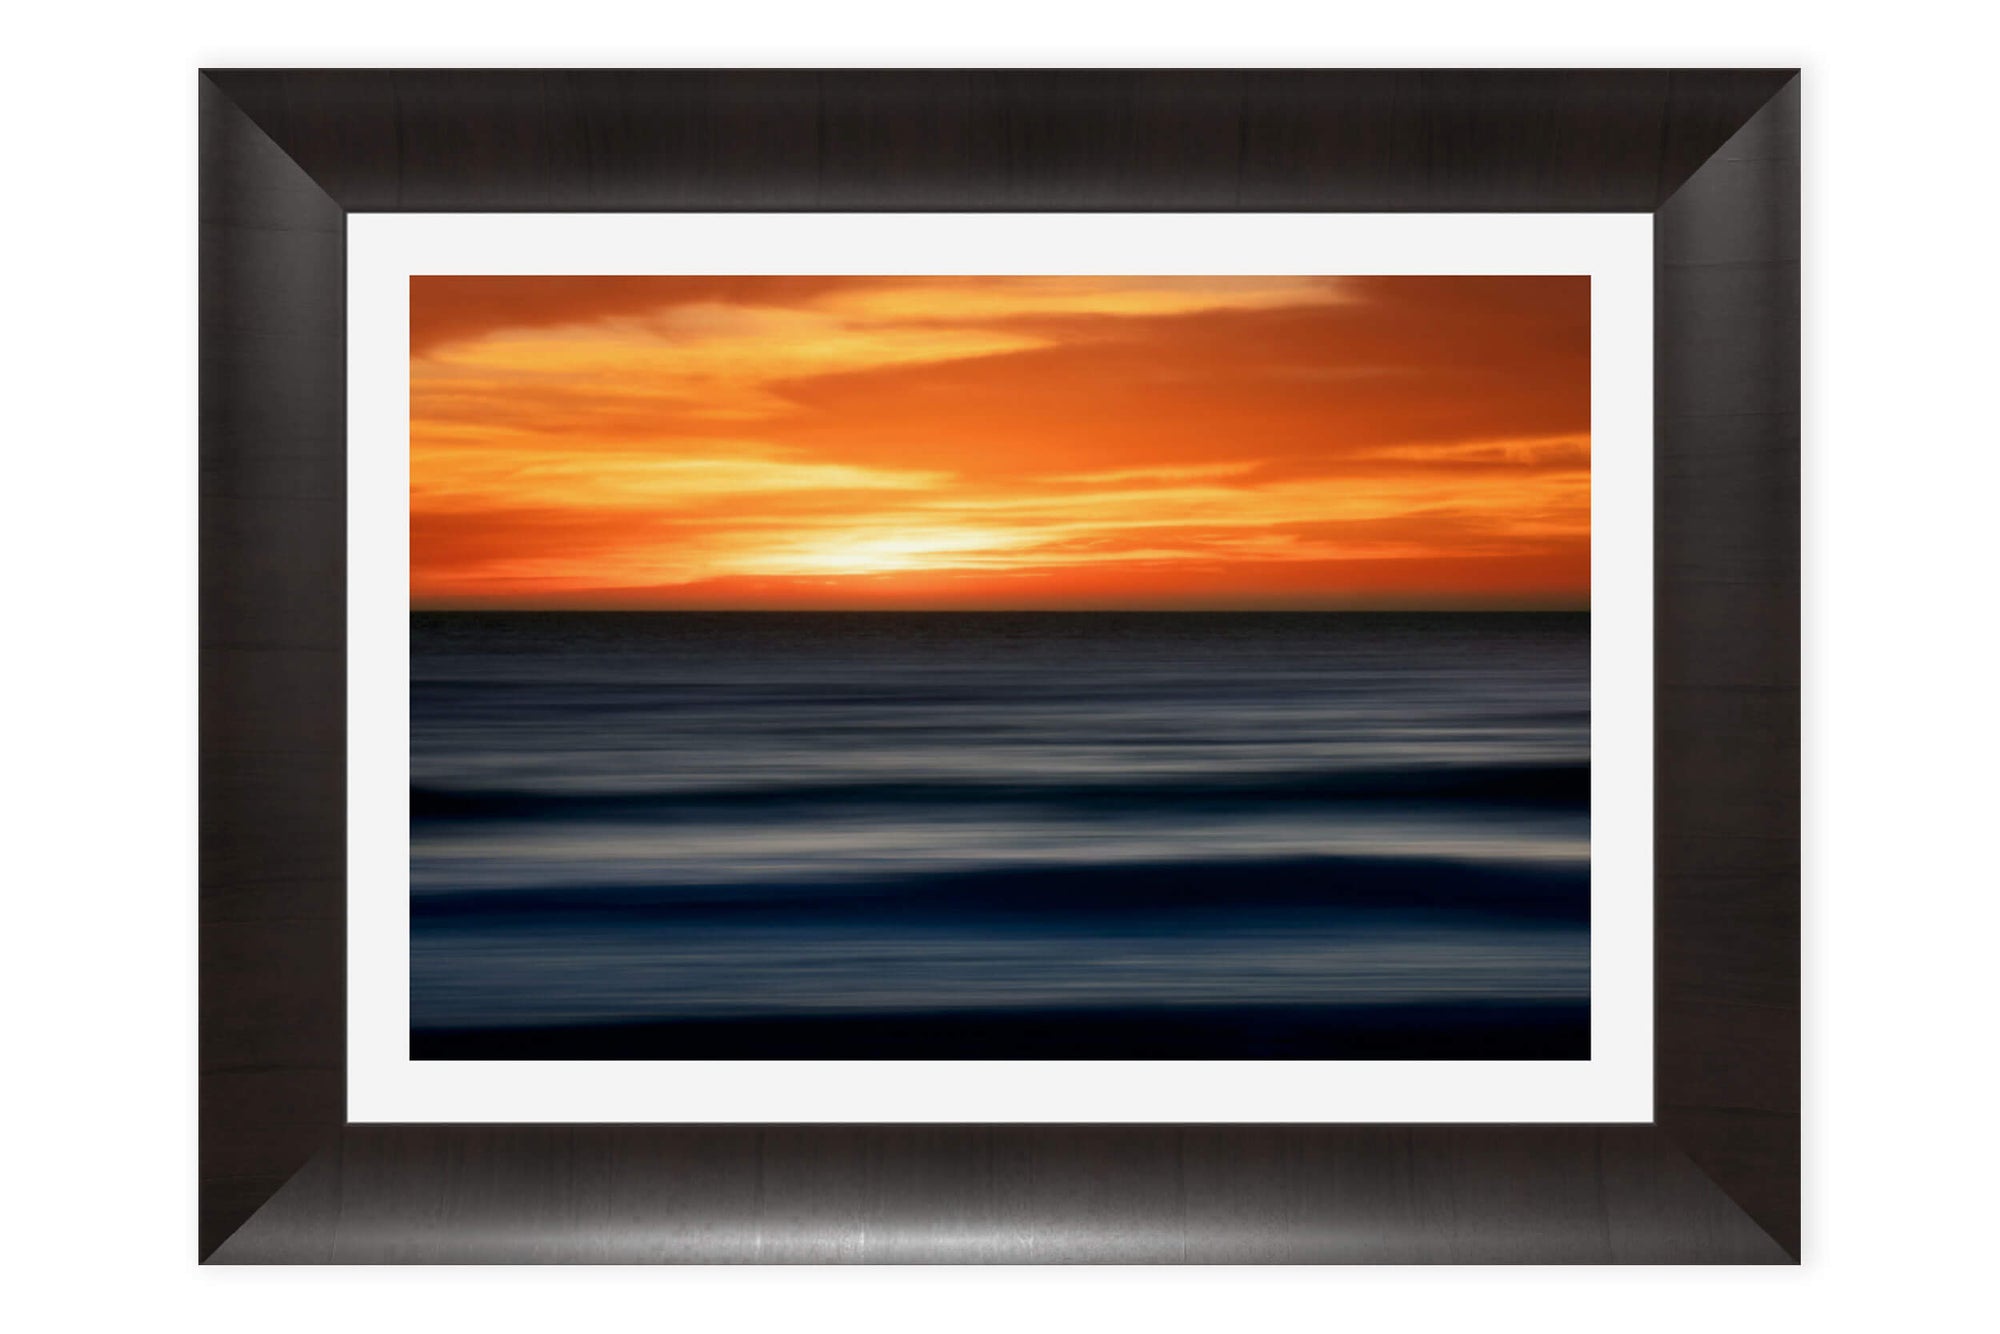 A framed Big Sur sunset picture captured along the California coast.